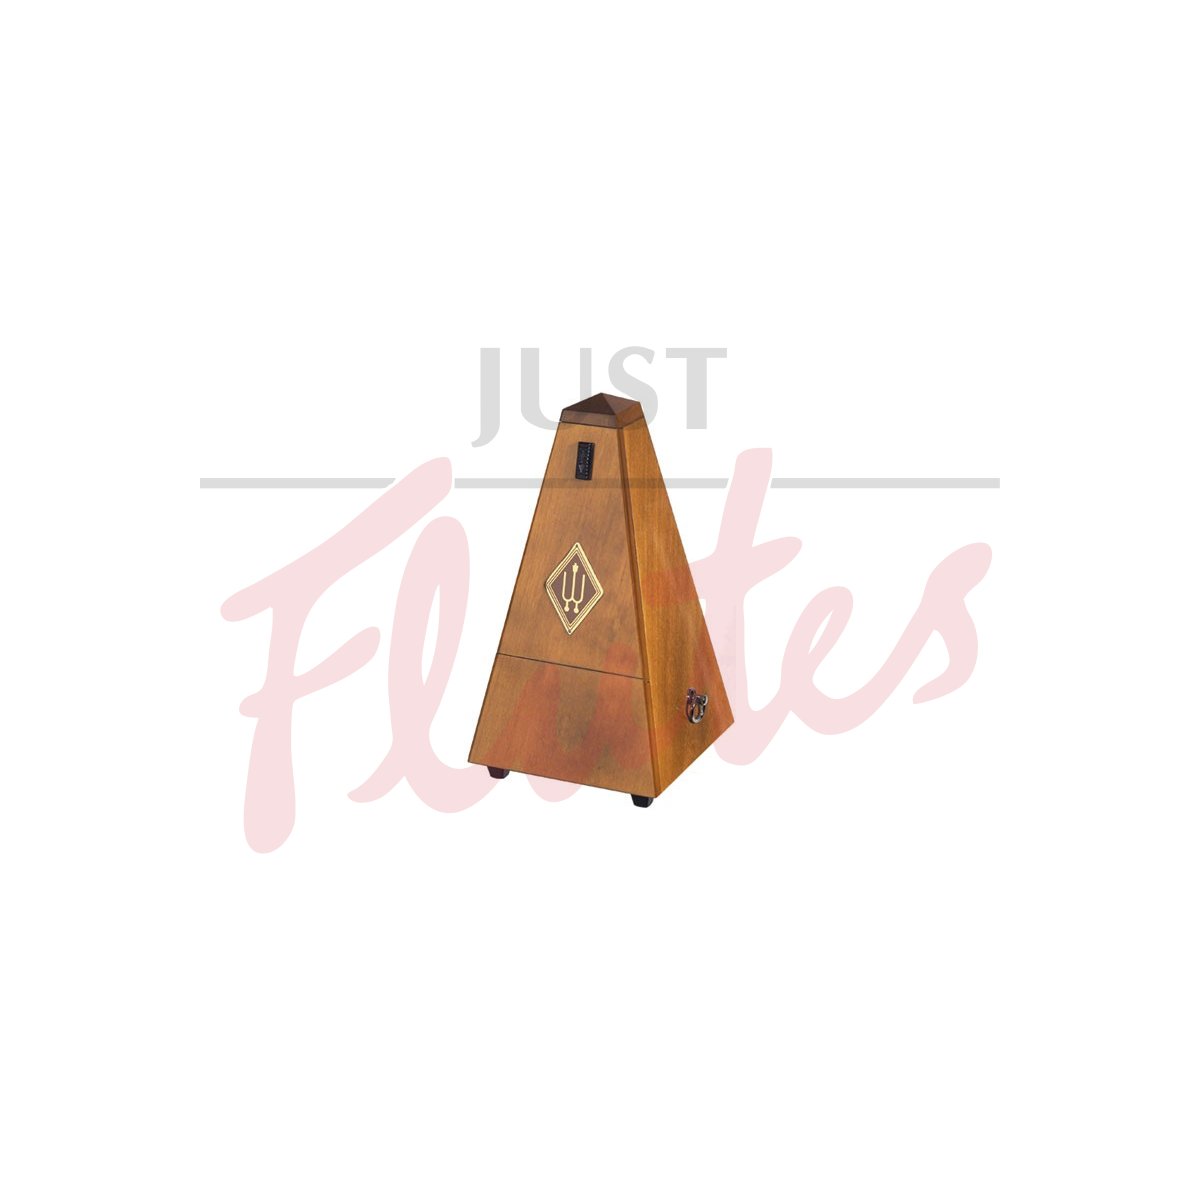 Wittner 813 Pyramid Metronome with Bell, Wood, Highly Polished Walnut Finish